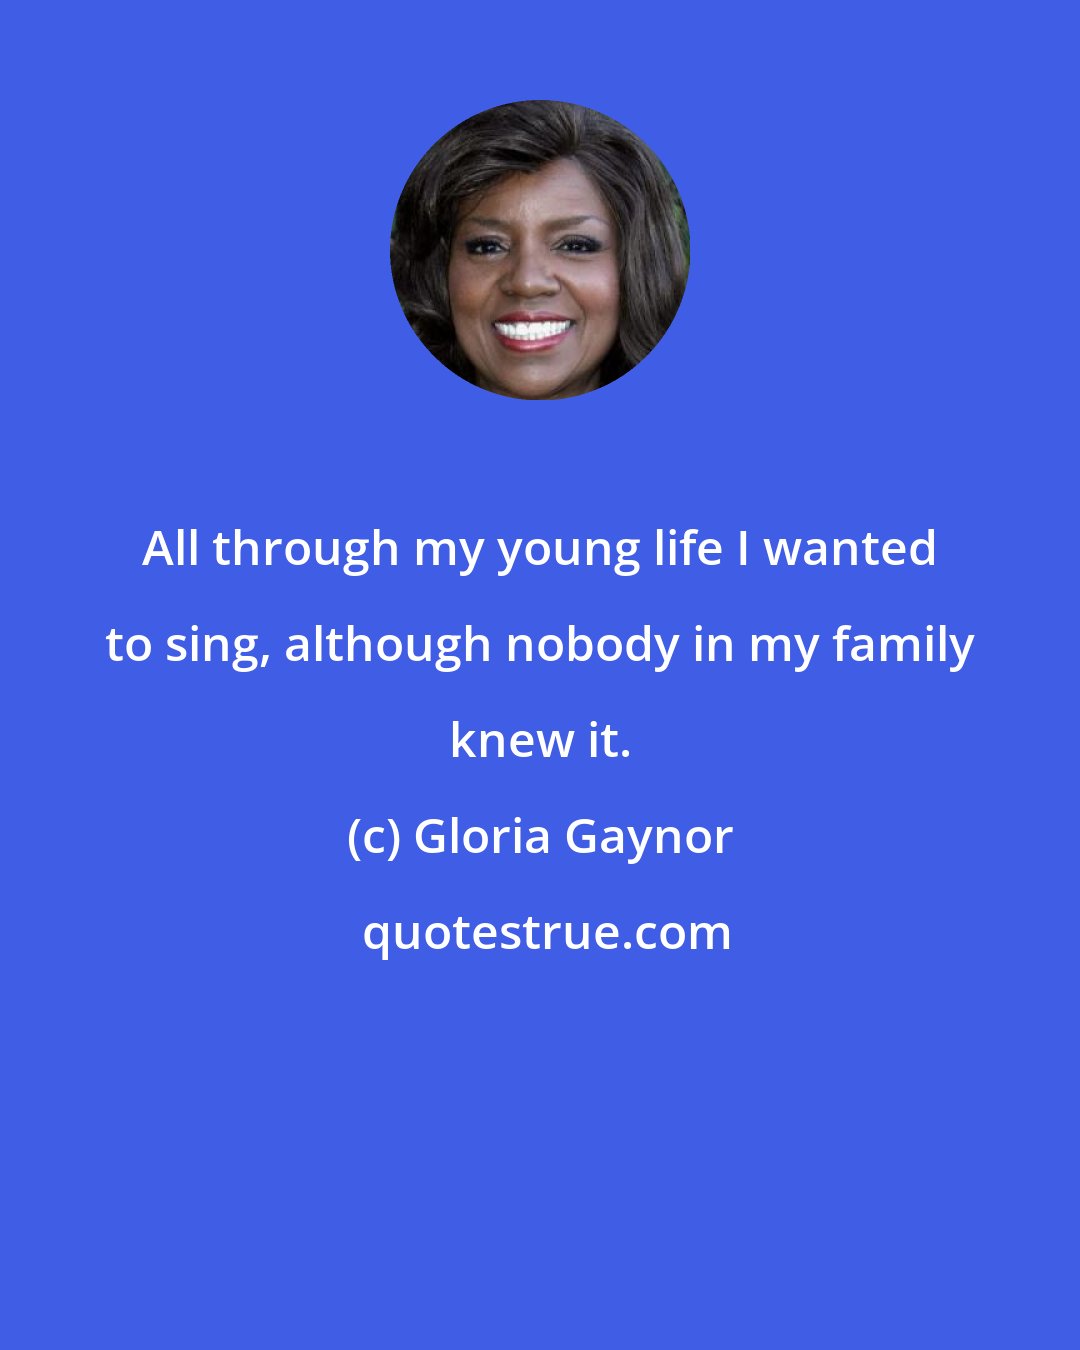 Gloria Gaynor: All through my young life I wanted to sing, although nobody in my family knew it.